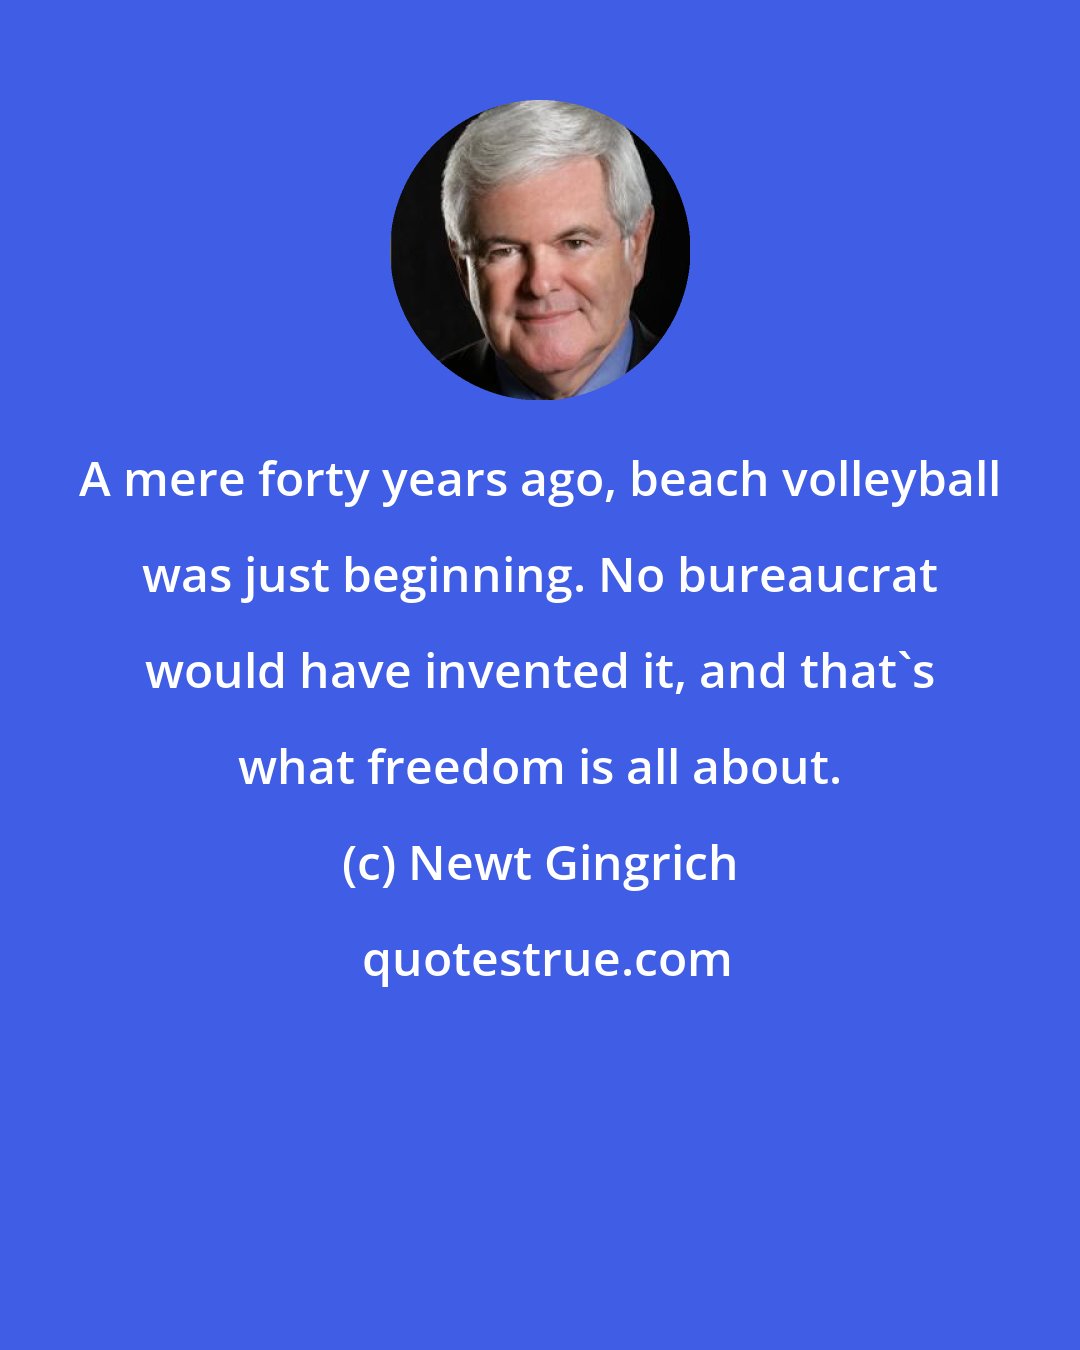 Newt Gingrich: A mere forty years ago, beach volleyball was just beginning. No bureaucrat would have invented it, and that's what freedom is all about.